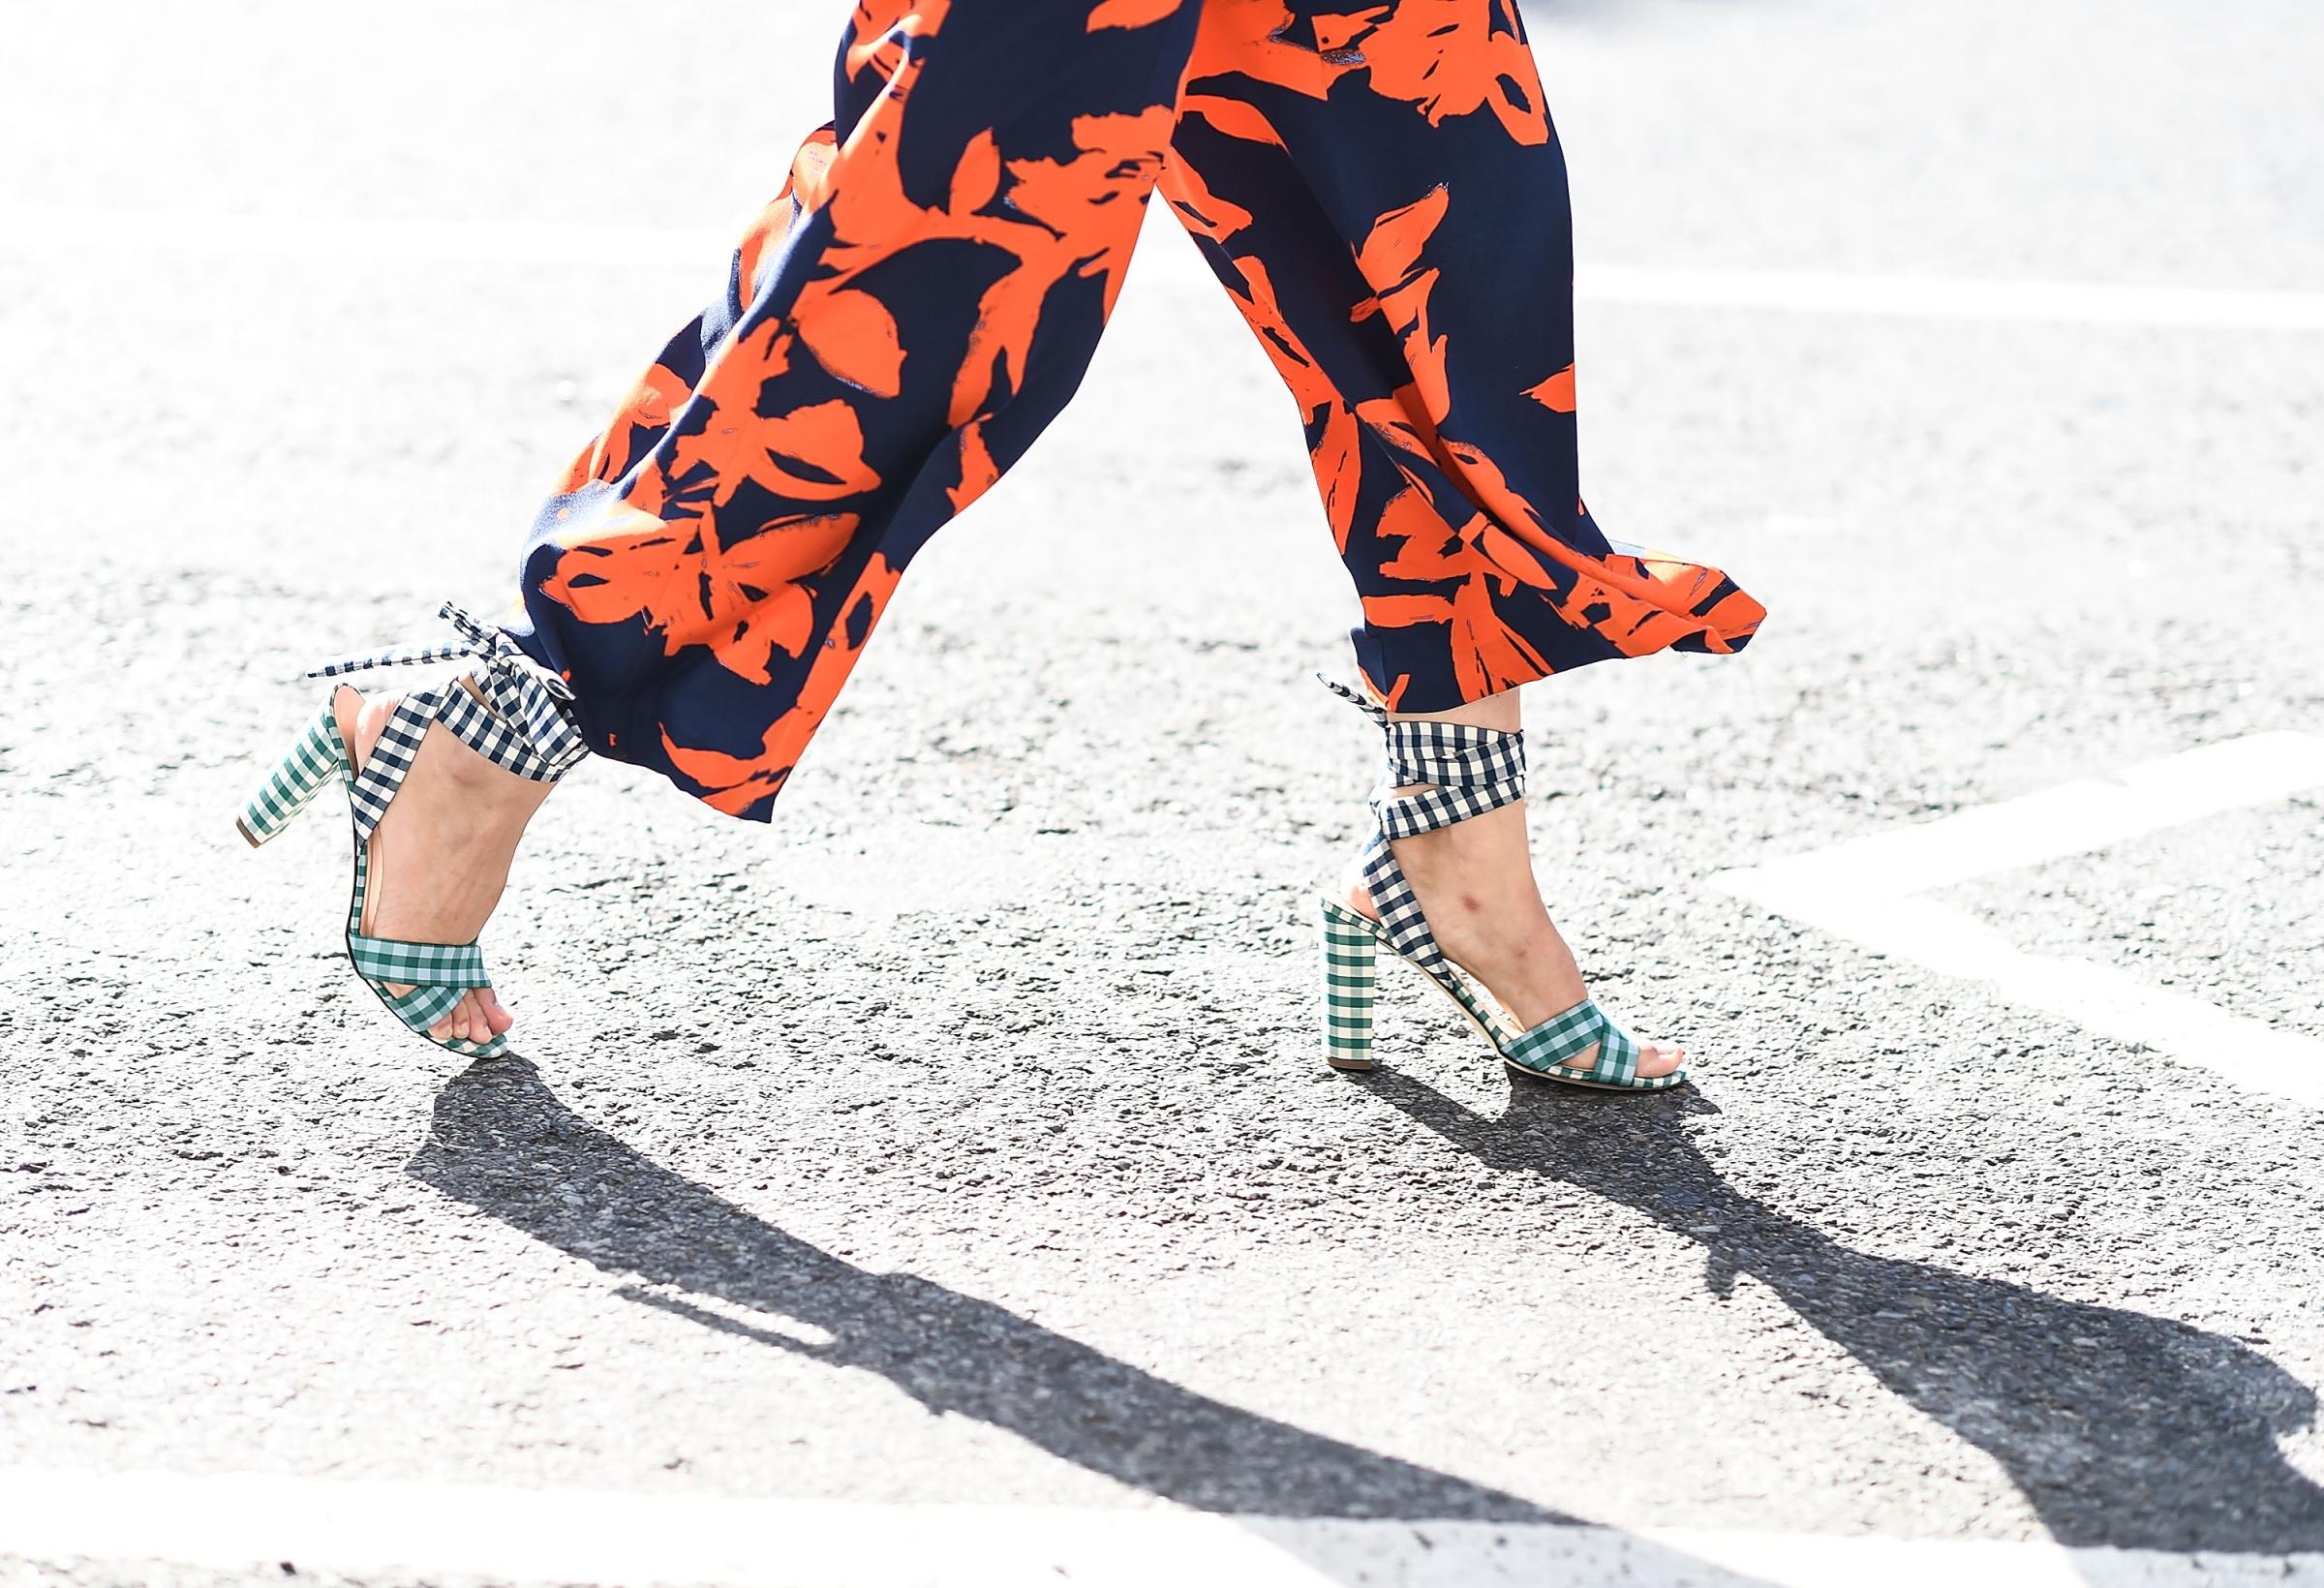 Print mixing was definitely this season's zaniest street-style trend — the only rules to pulling off this style? More is more and brighter is best.